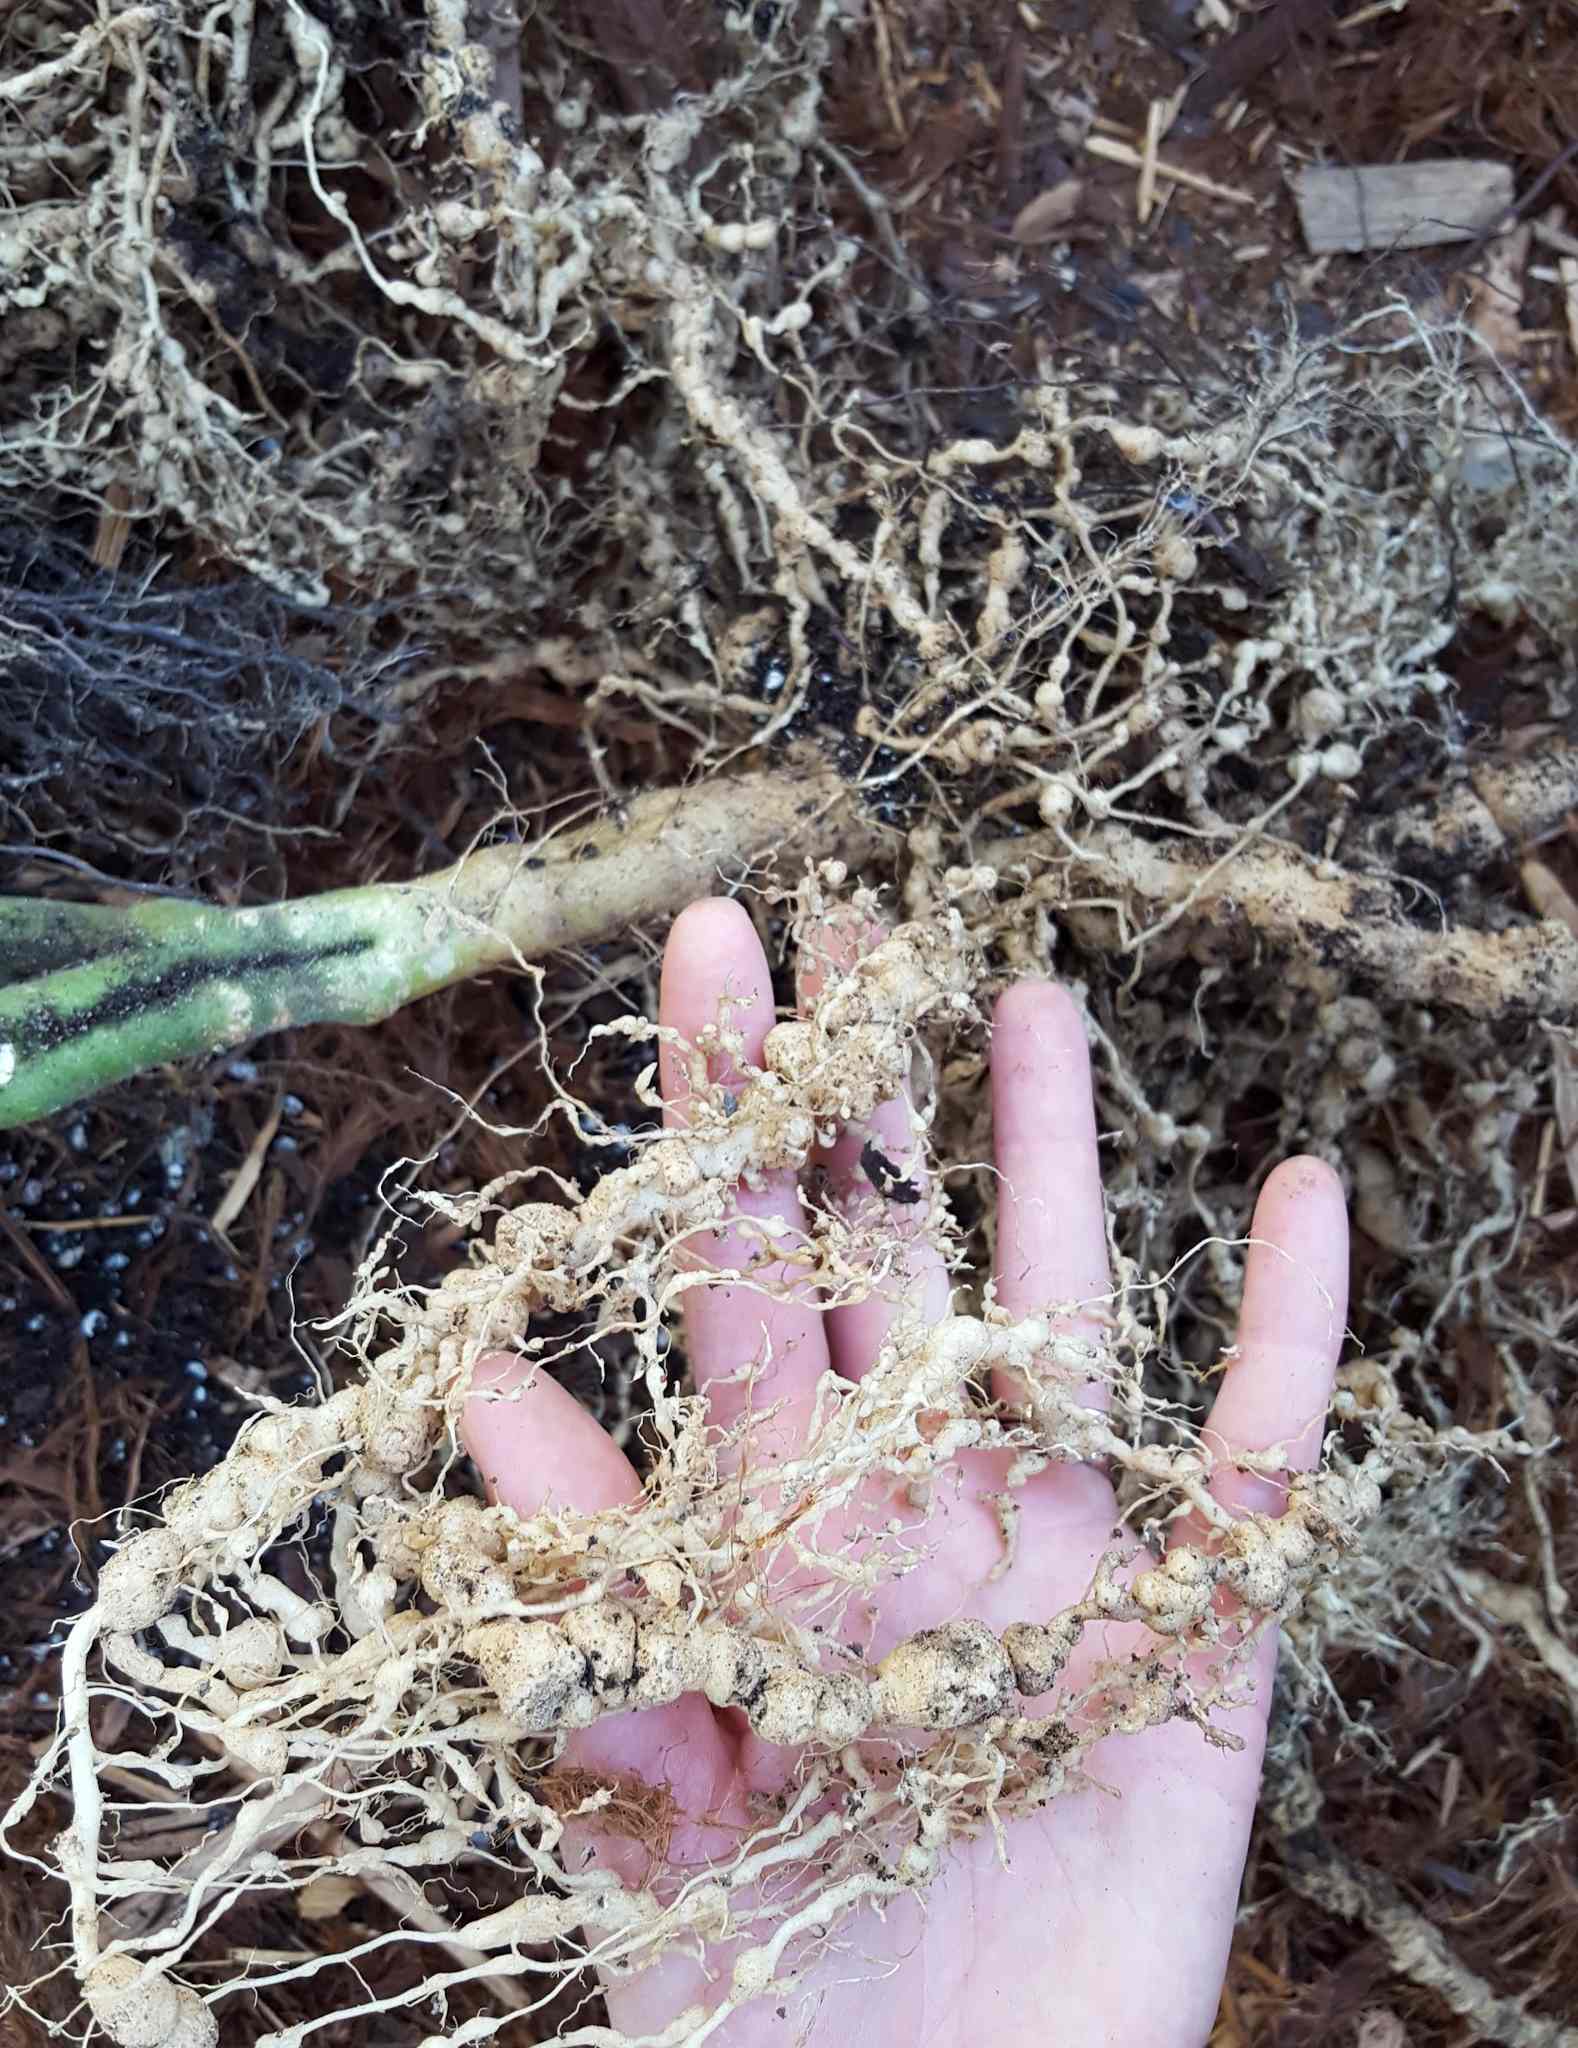 A hand is outstretched with the palm facing upwards. A stem of a plant is nearby with its roots exposed, the roots are bulbous and knotty with many irregularities. These roots have been affected by root knot nematodes. 